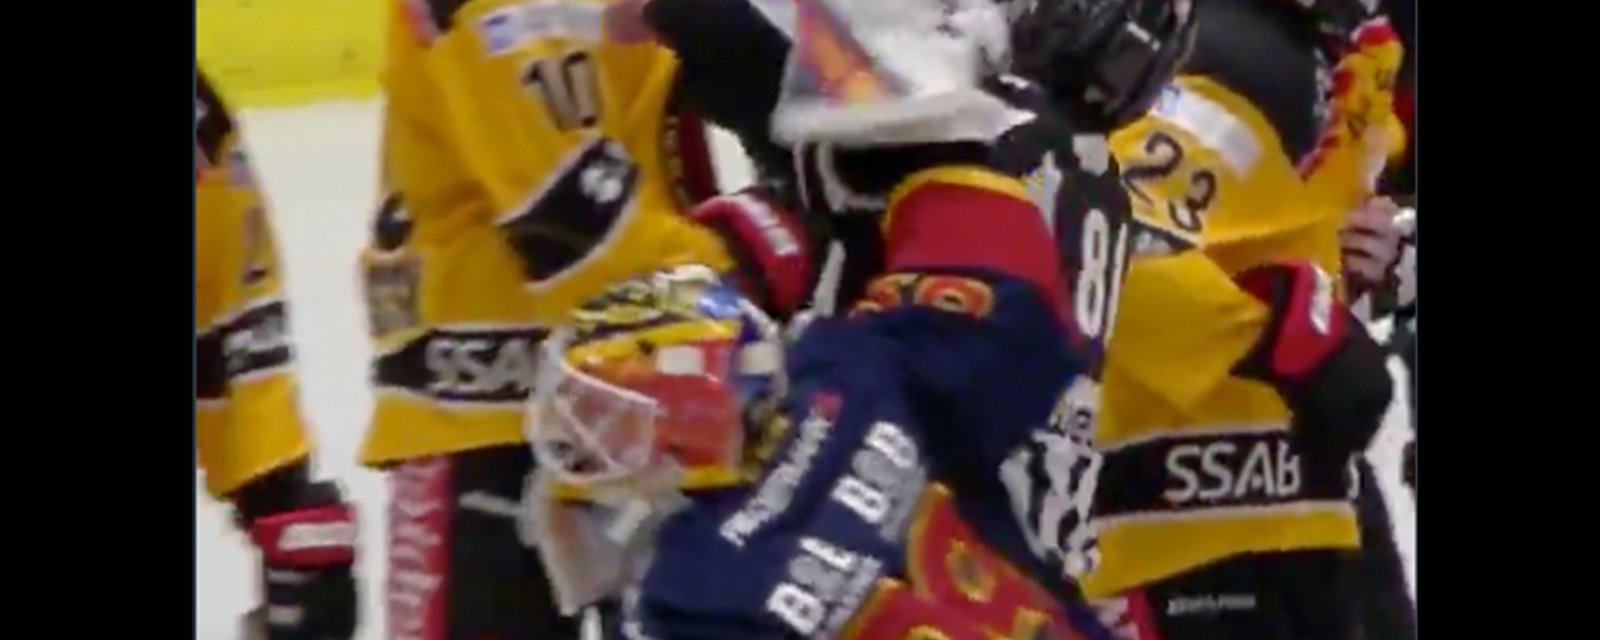 Former Bruins goalie Svedberg punches referee in the face, gets suspended